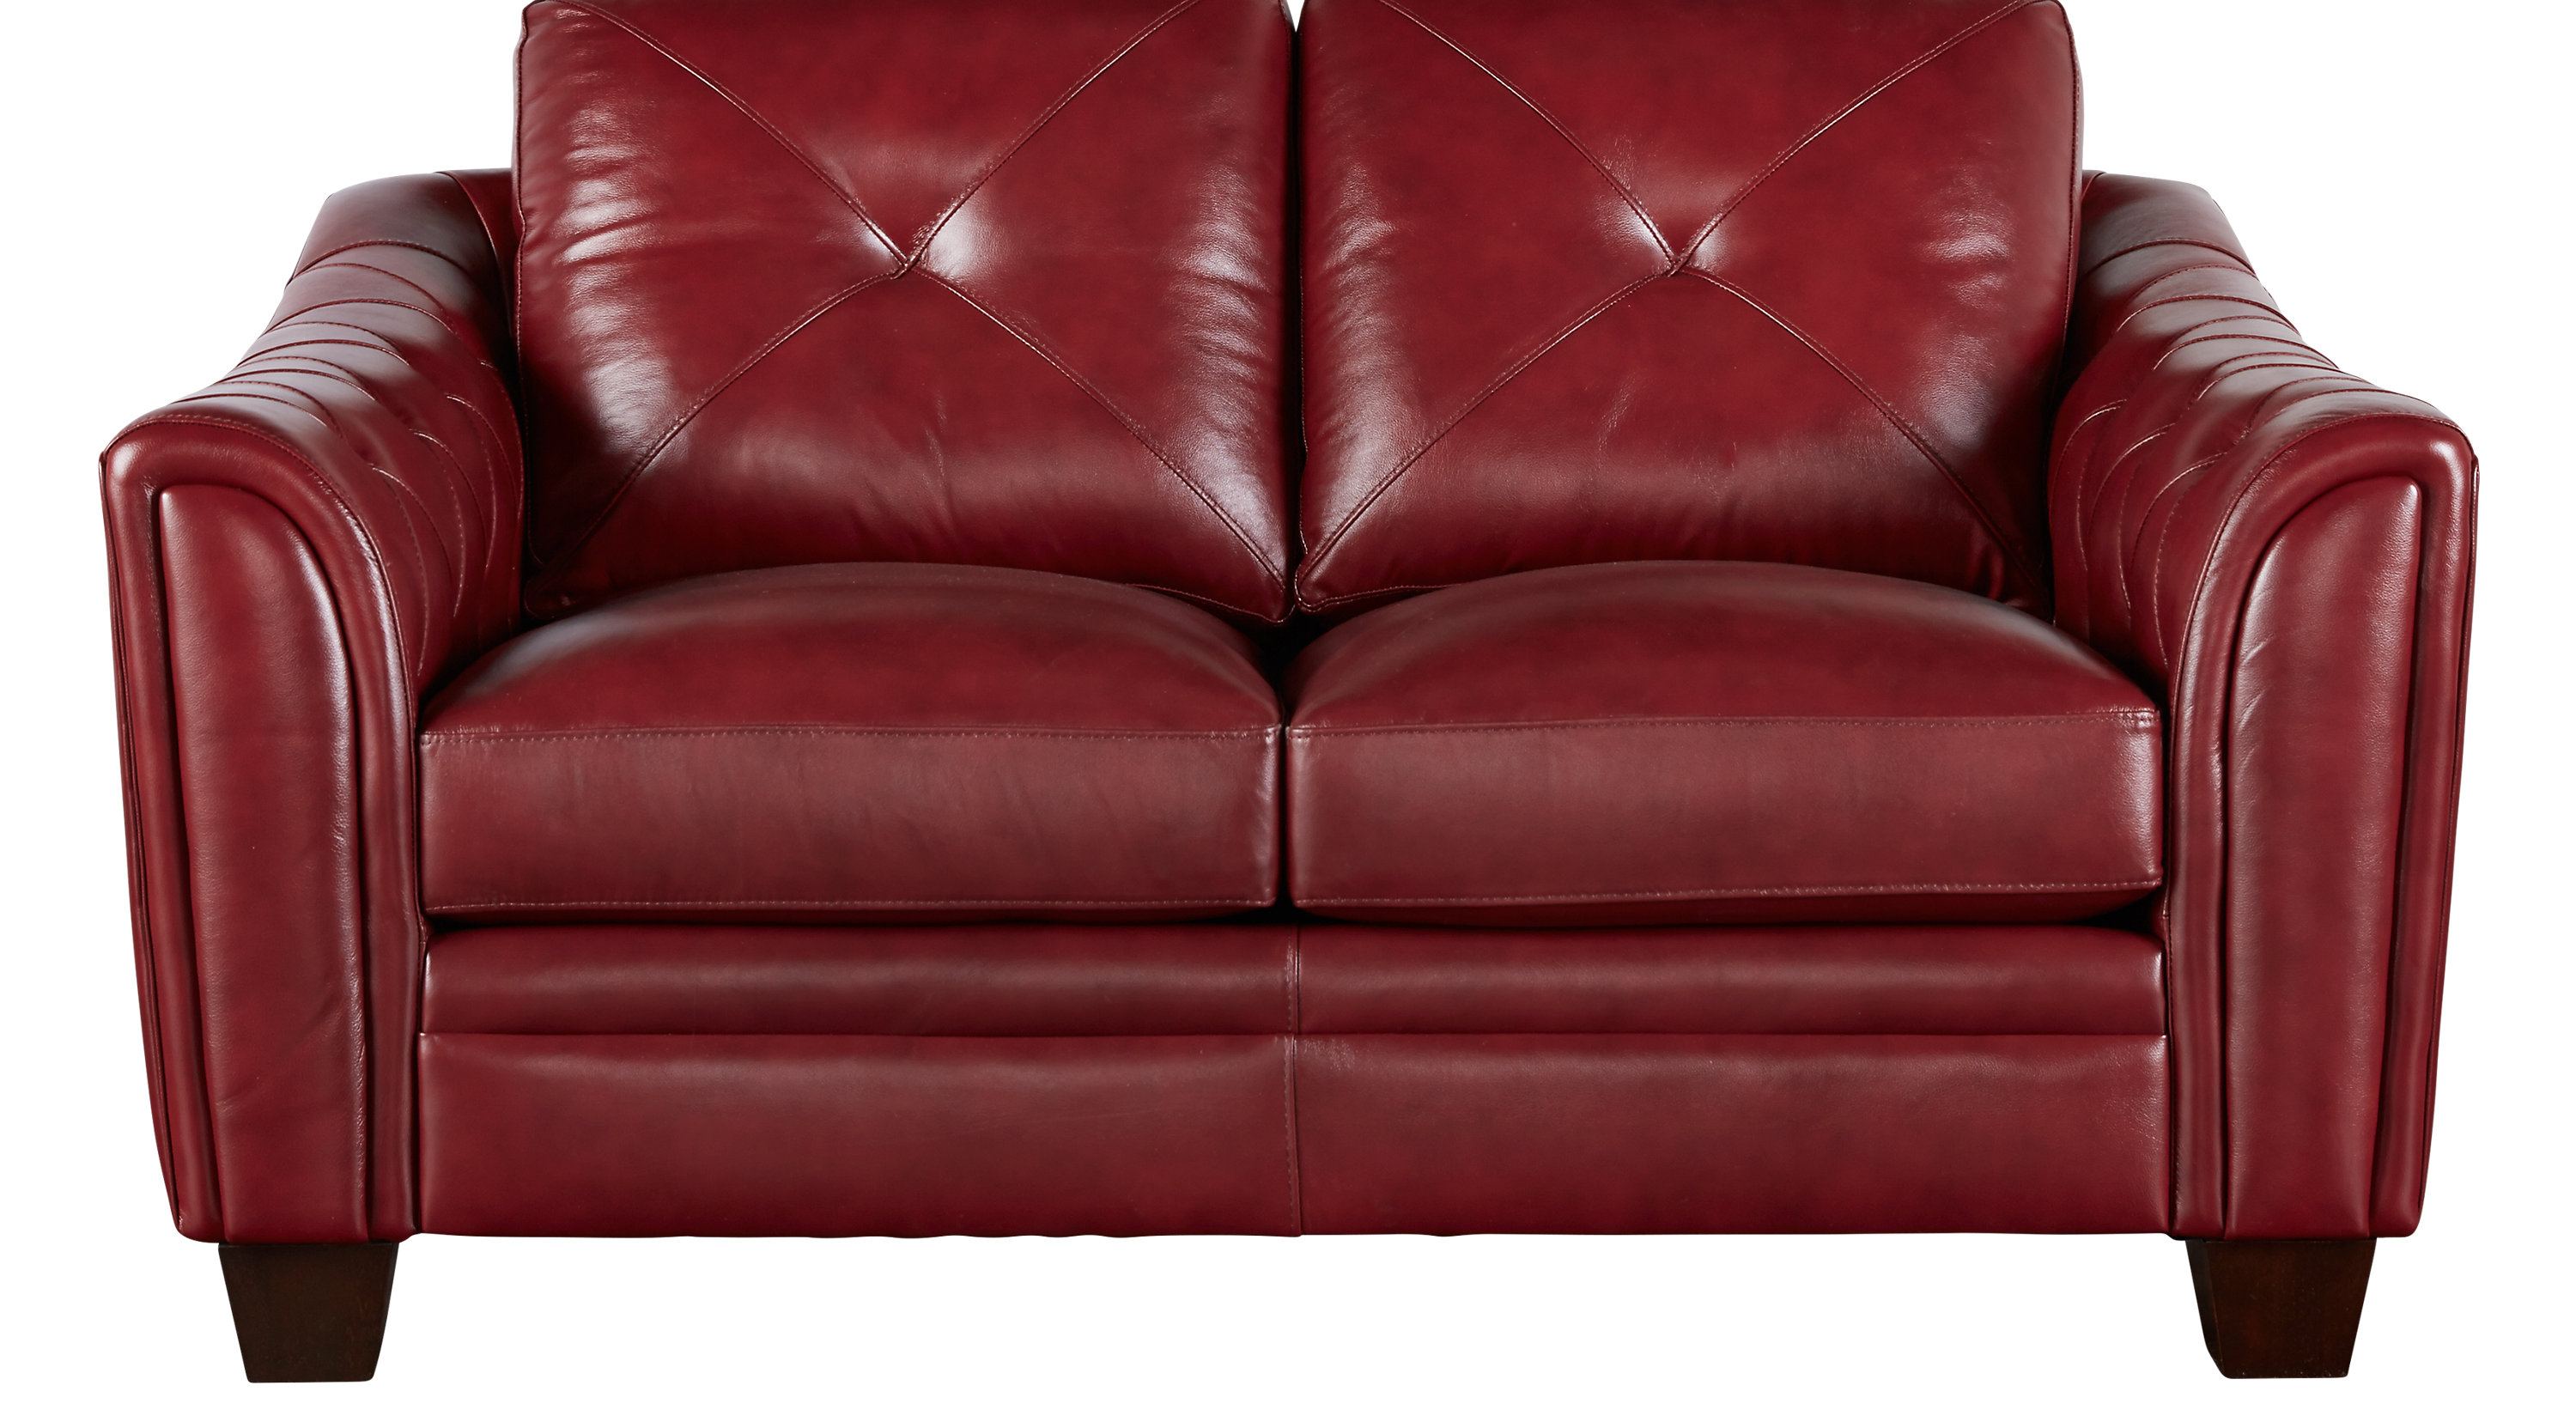 $868.00 - Marcella Red Leather Loveseat - Classic - Contemporary,